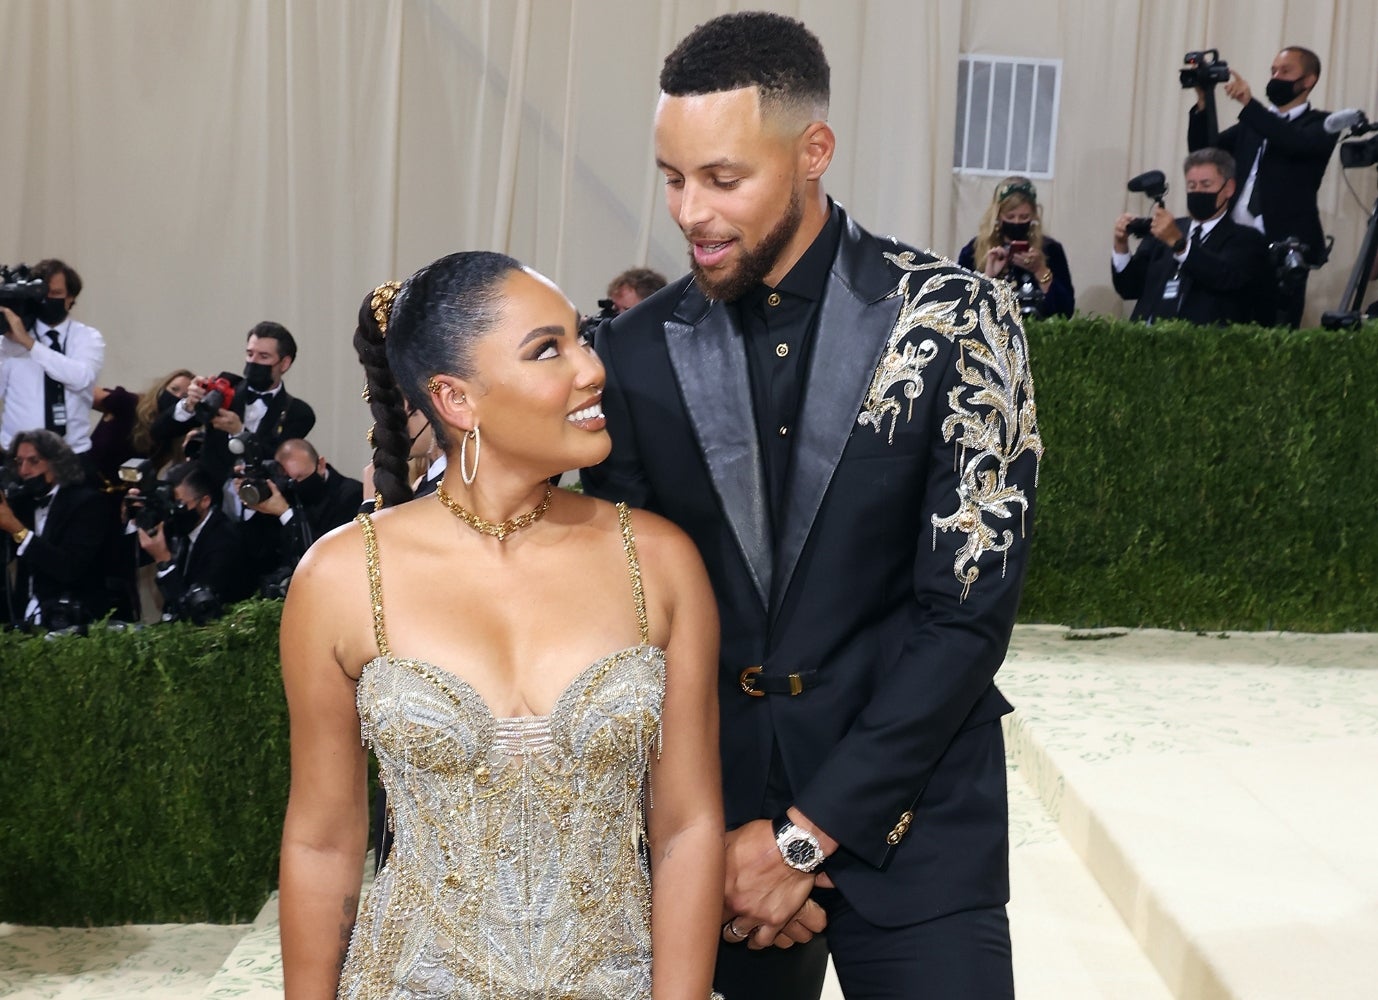 ‘Don’t Disrespect My Marriage’: Ayesha Curry Shuts Down ‘Ridiculous’ Rumors About Her Relationship